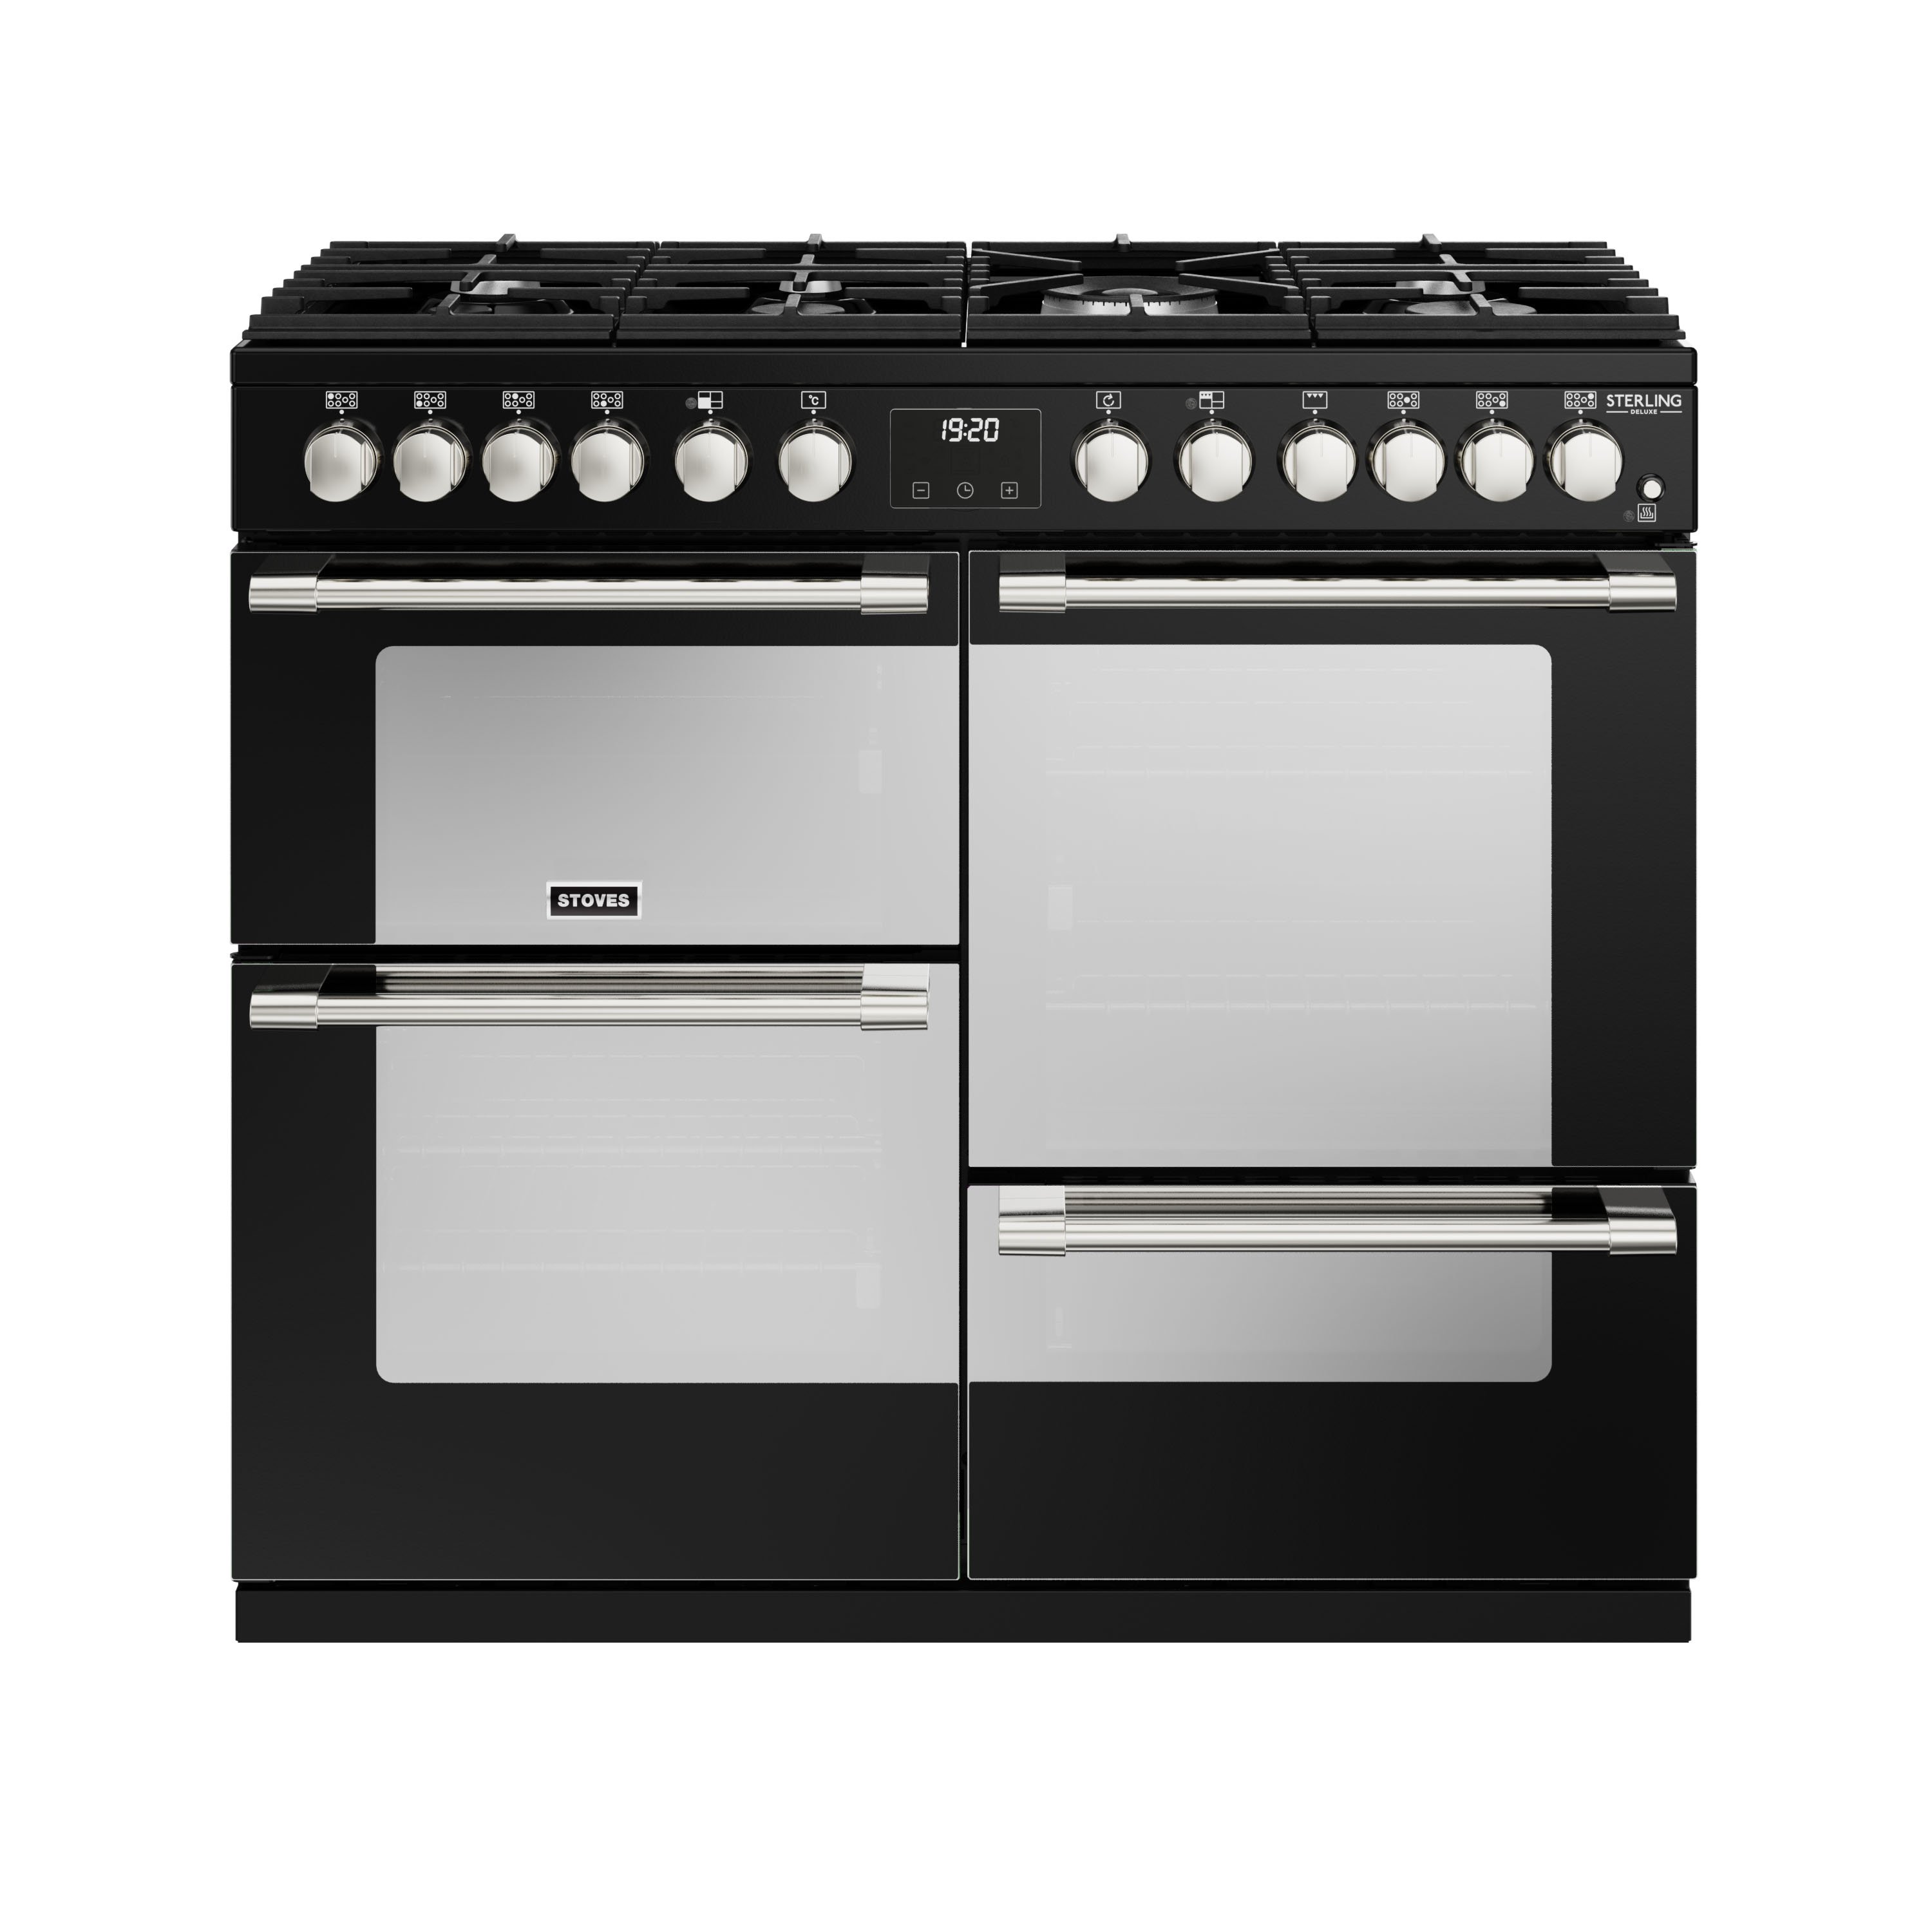 100cm dual fuel range cooker with a 7 burner gas hob, conventional oven & grill, multifunction main oven with TrueTemp digital thermostat, fanned second oven and dedicated slow cook oven